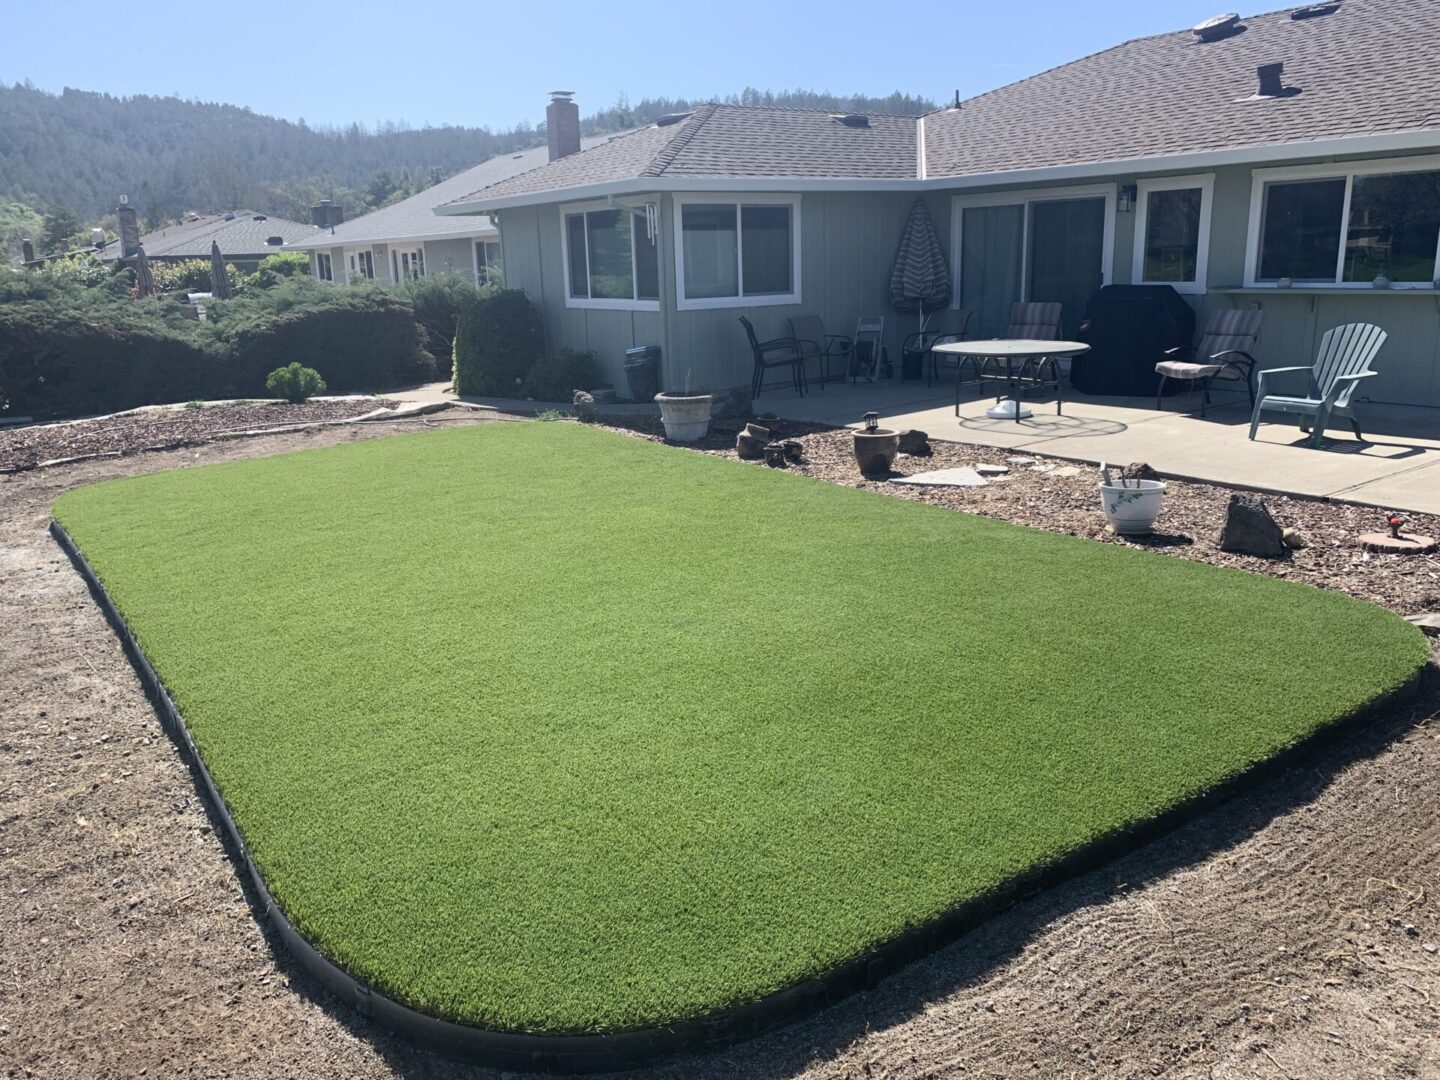 Artificial lawn, landscaping project in progress by Guys Yard Design in Sonoma, CA